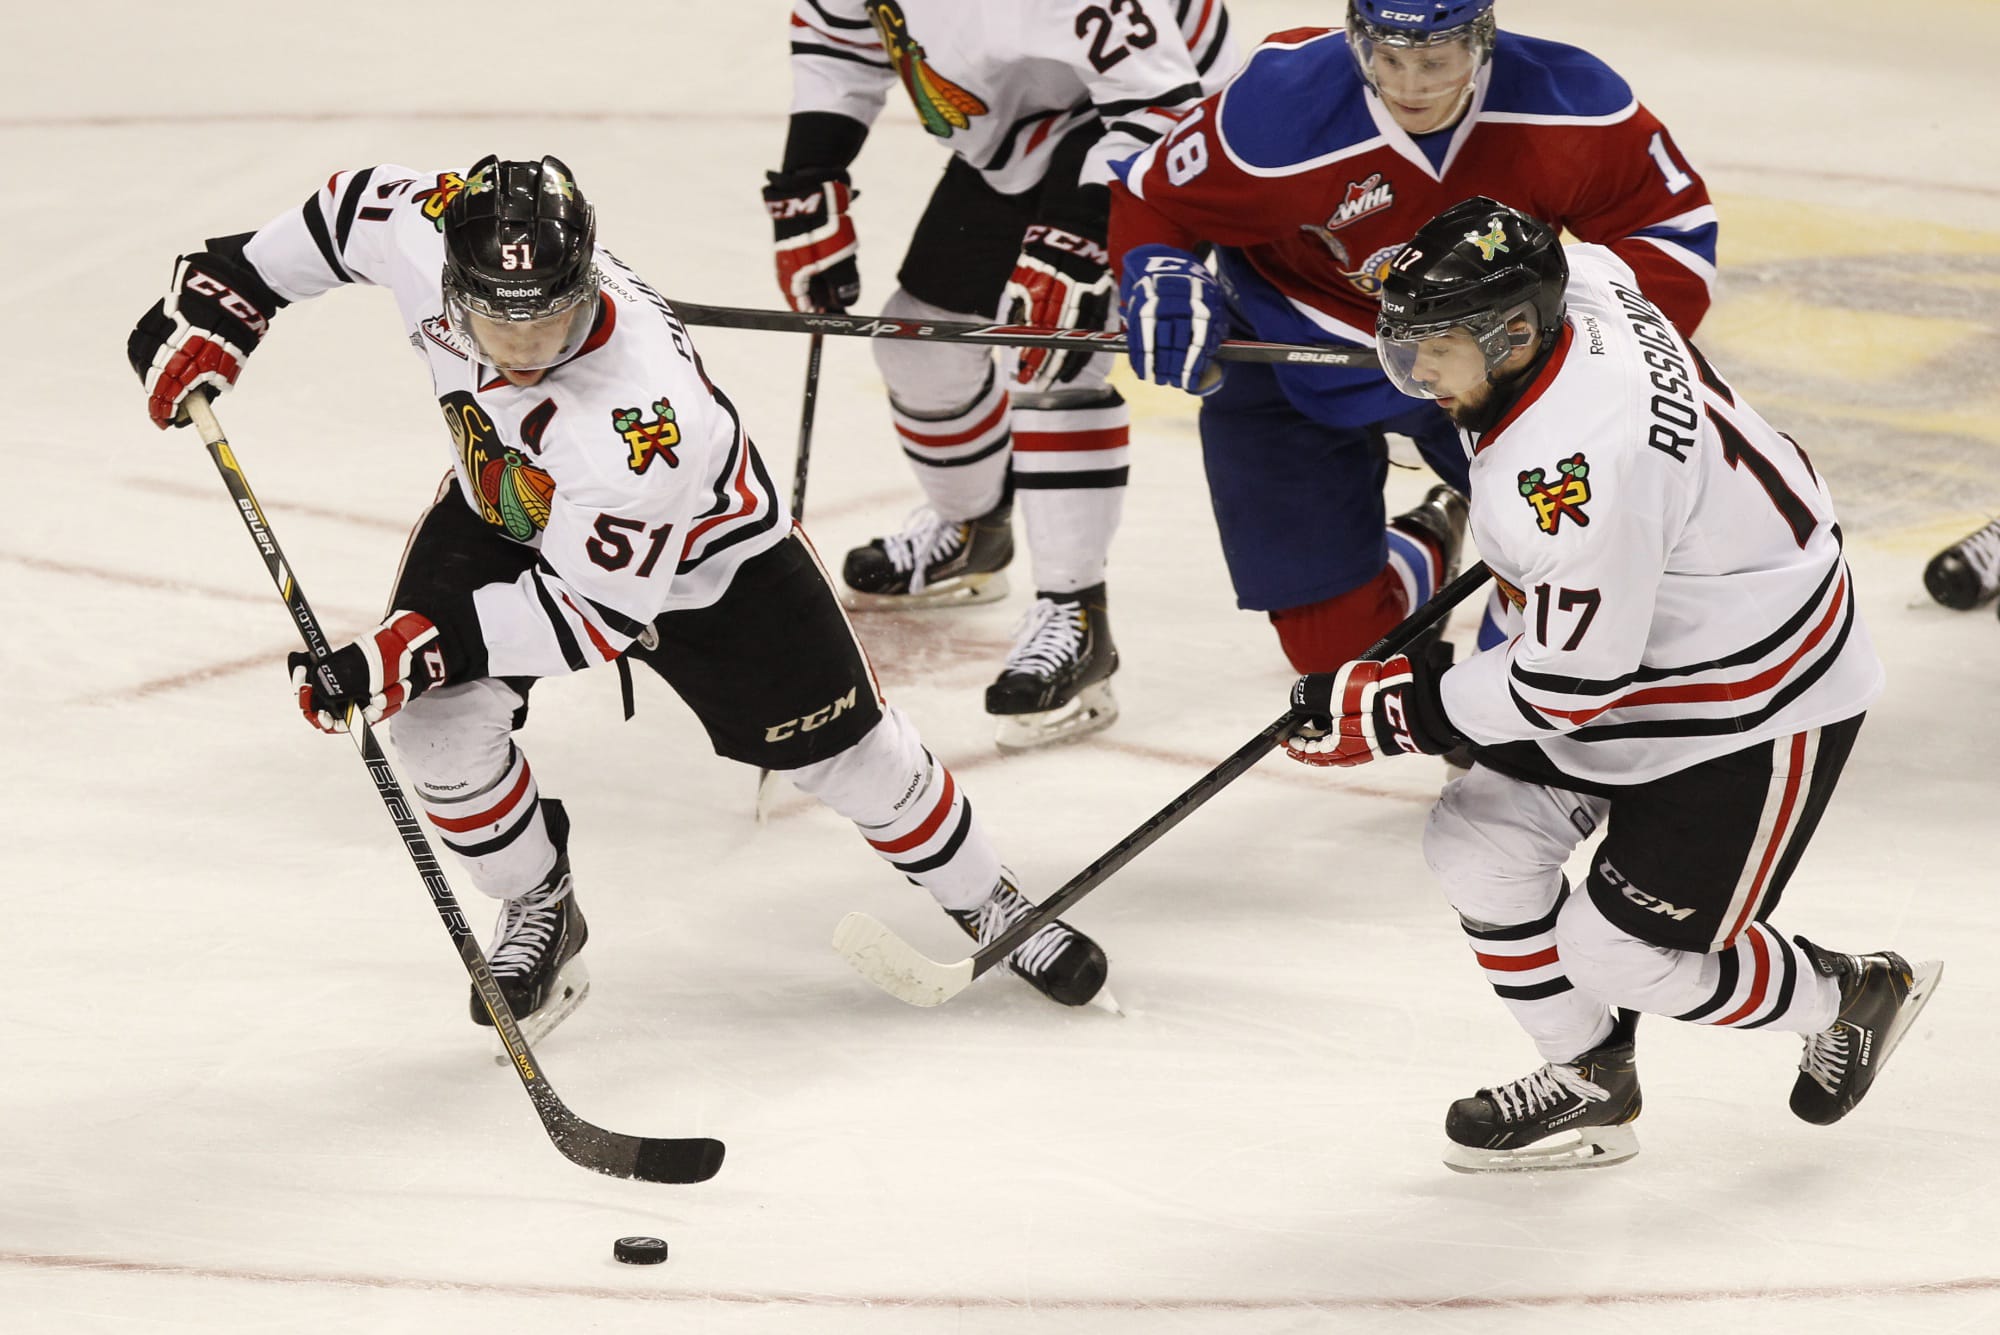 Portland's Derrick Pouliot (51) had two assists in the team's Game 1 victory.